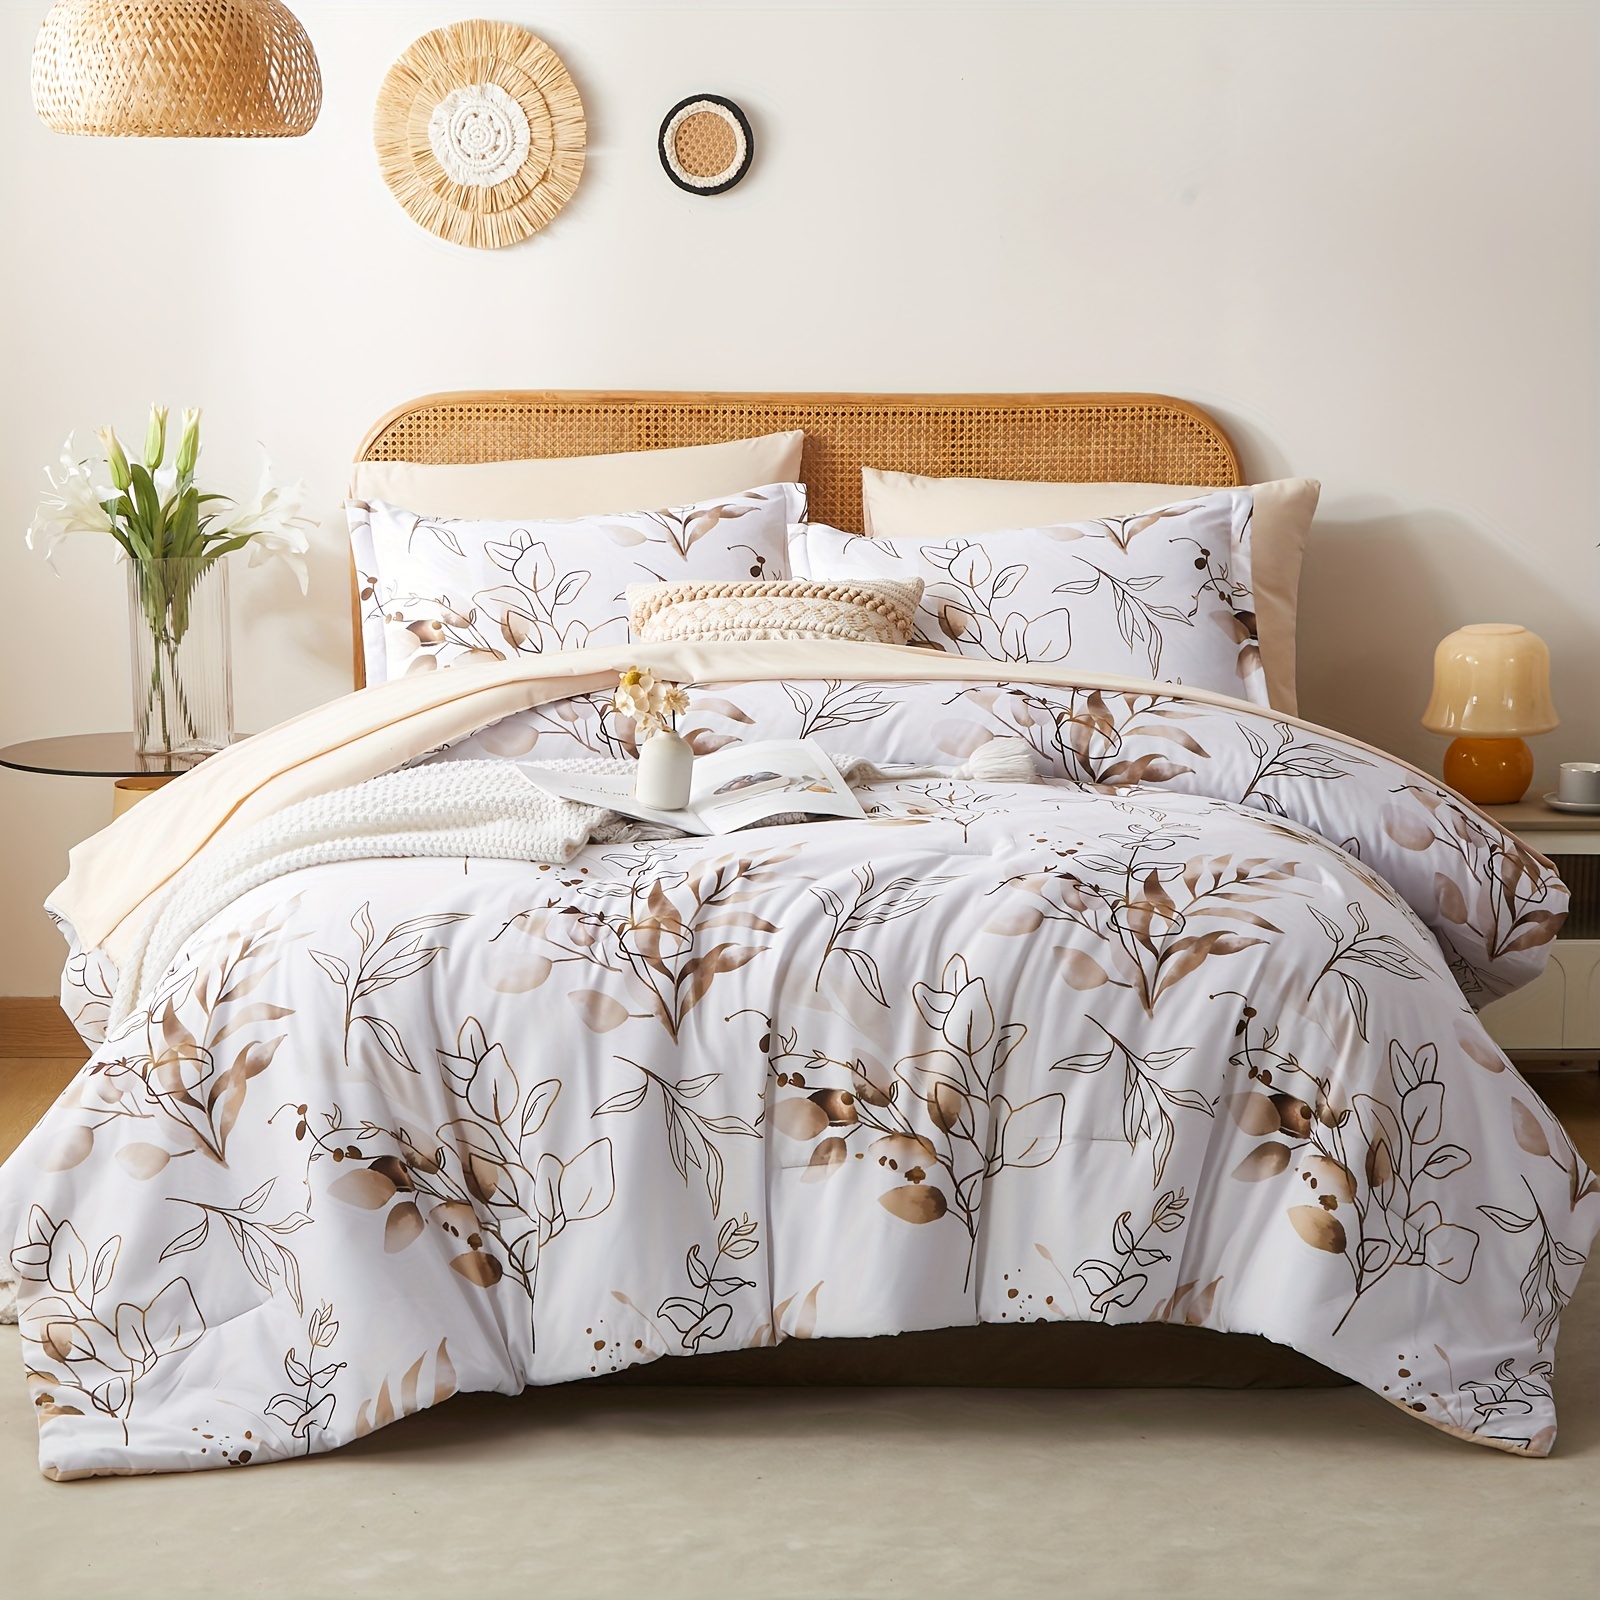 

5/7pcs Reversible Golden Leaves Printed Comforter Sets - Stain-resistant, Hypoallergenic, And Lightweight Bedding For All Seasons - Twin/full/queen/king Size Bed In A Bag With 100% Polyester Filling